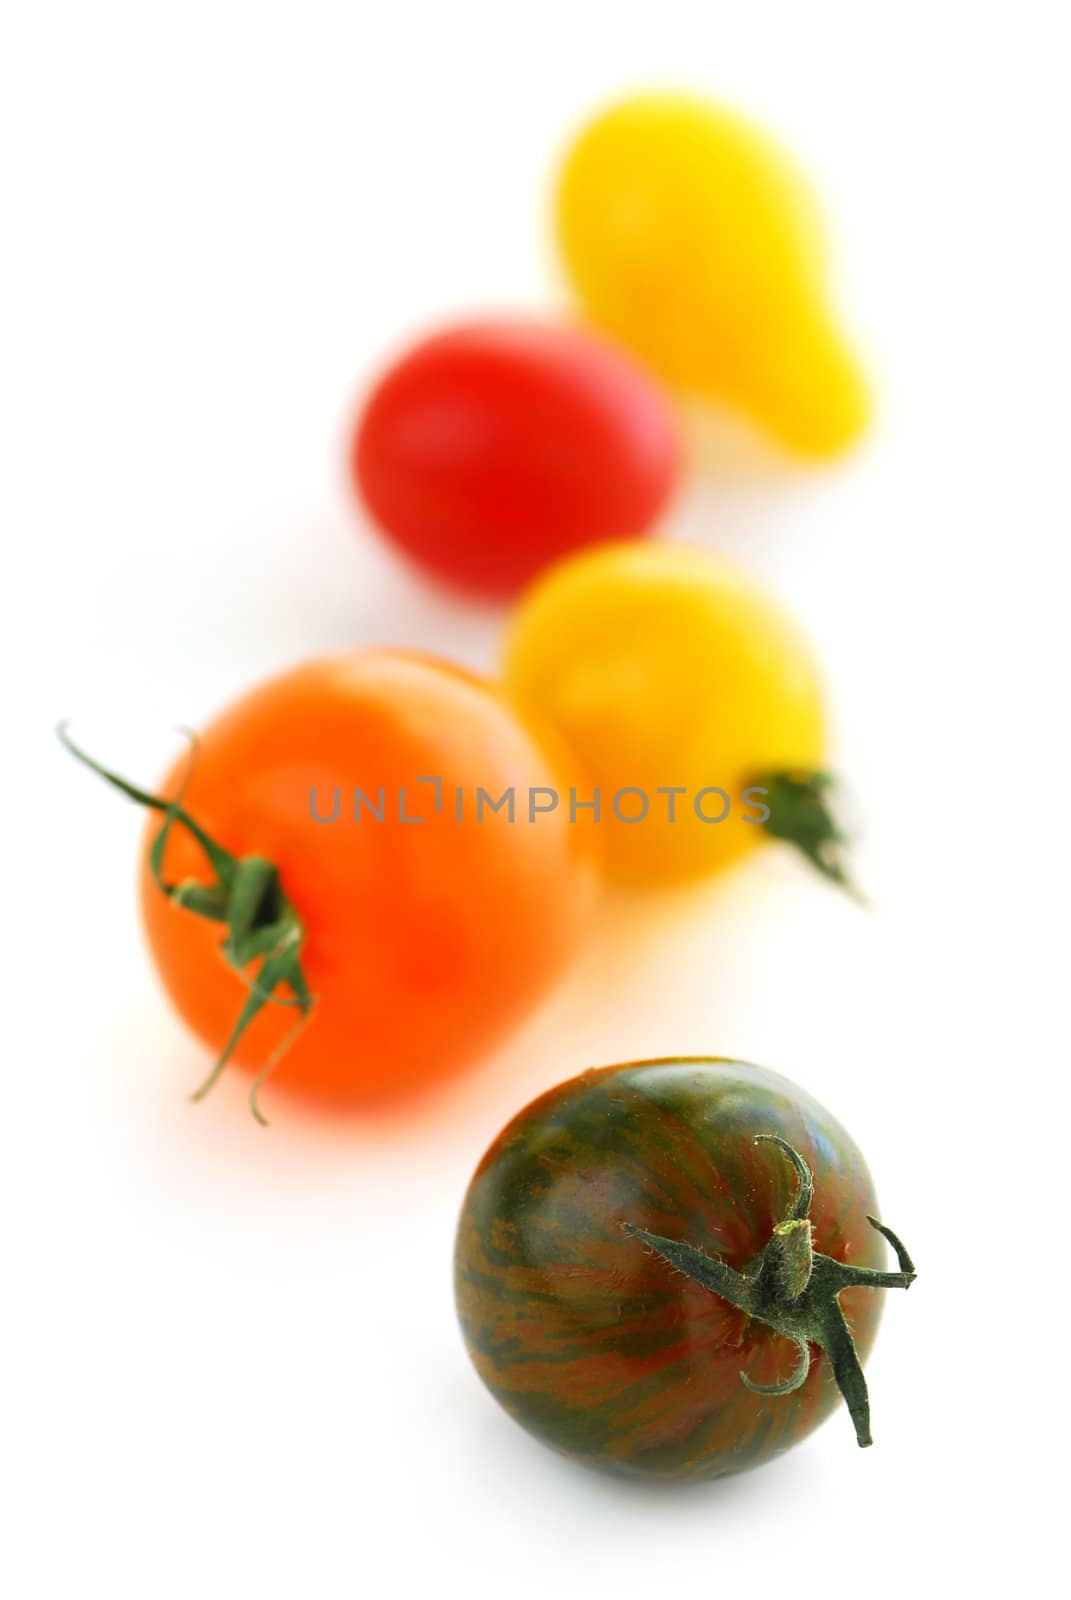 Cherry tomatoes by elenathewise